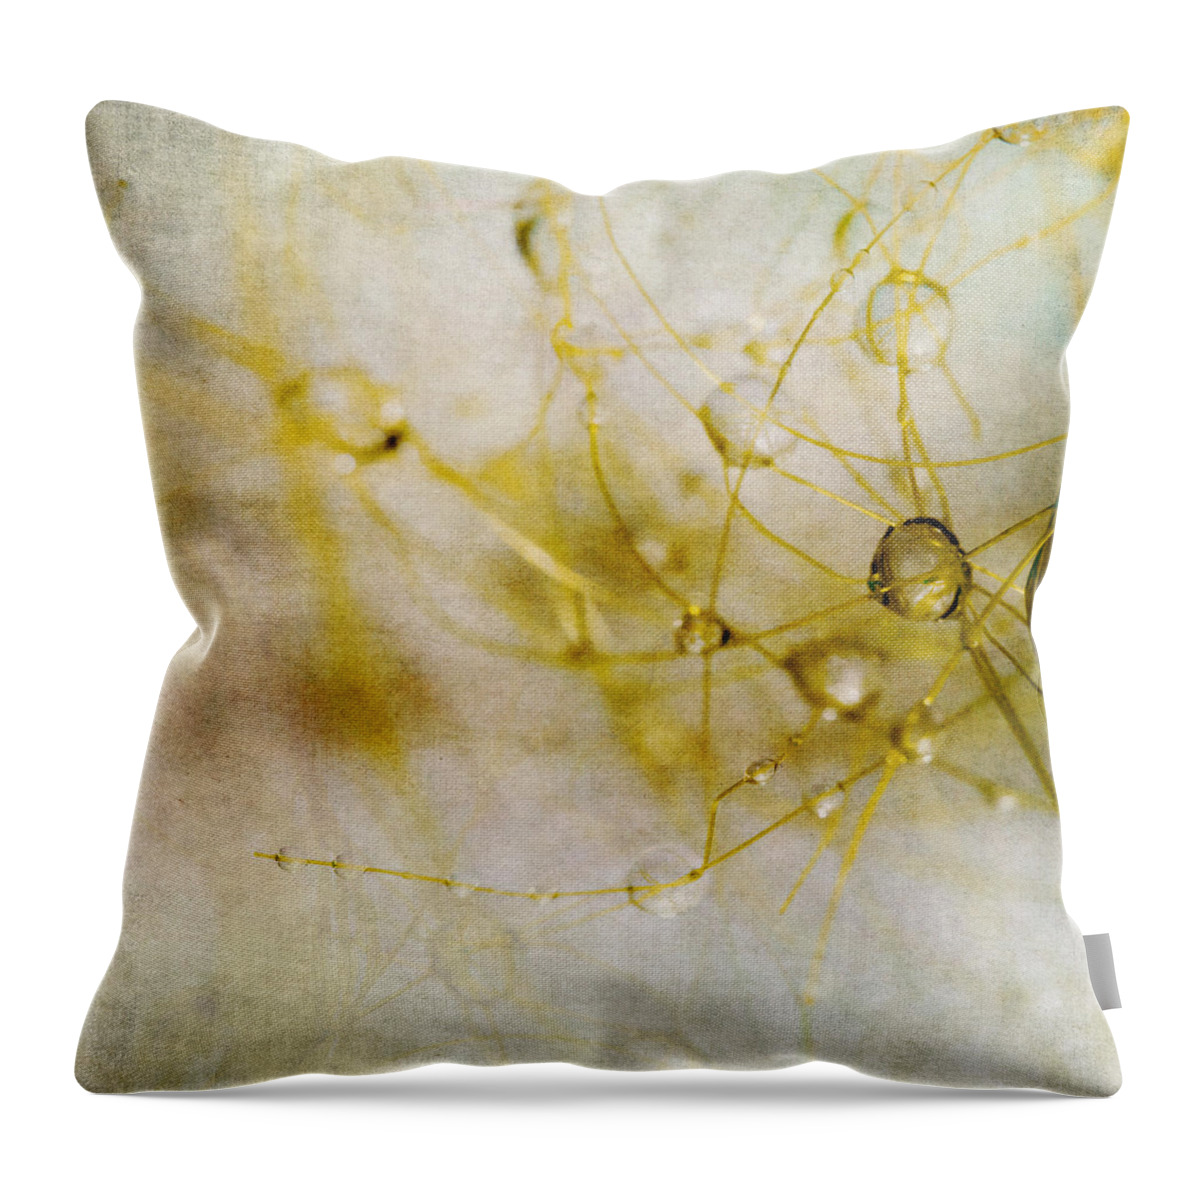 Abstract Throw Pillow featuring the photograph Opus No. 2 by Ryan Weddle